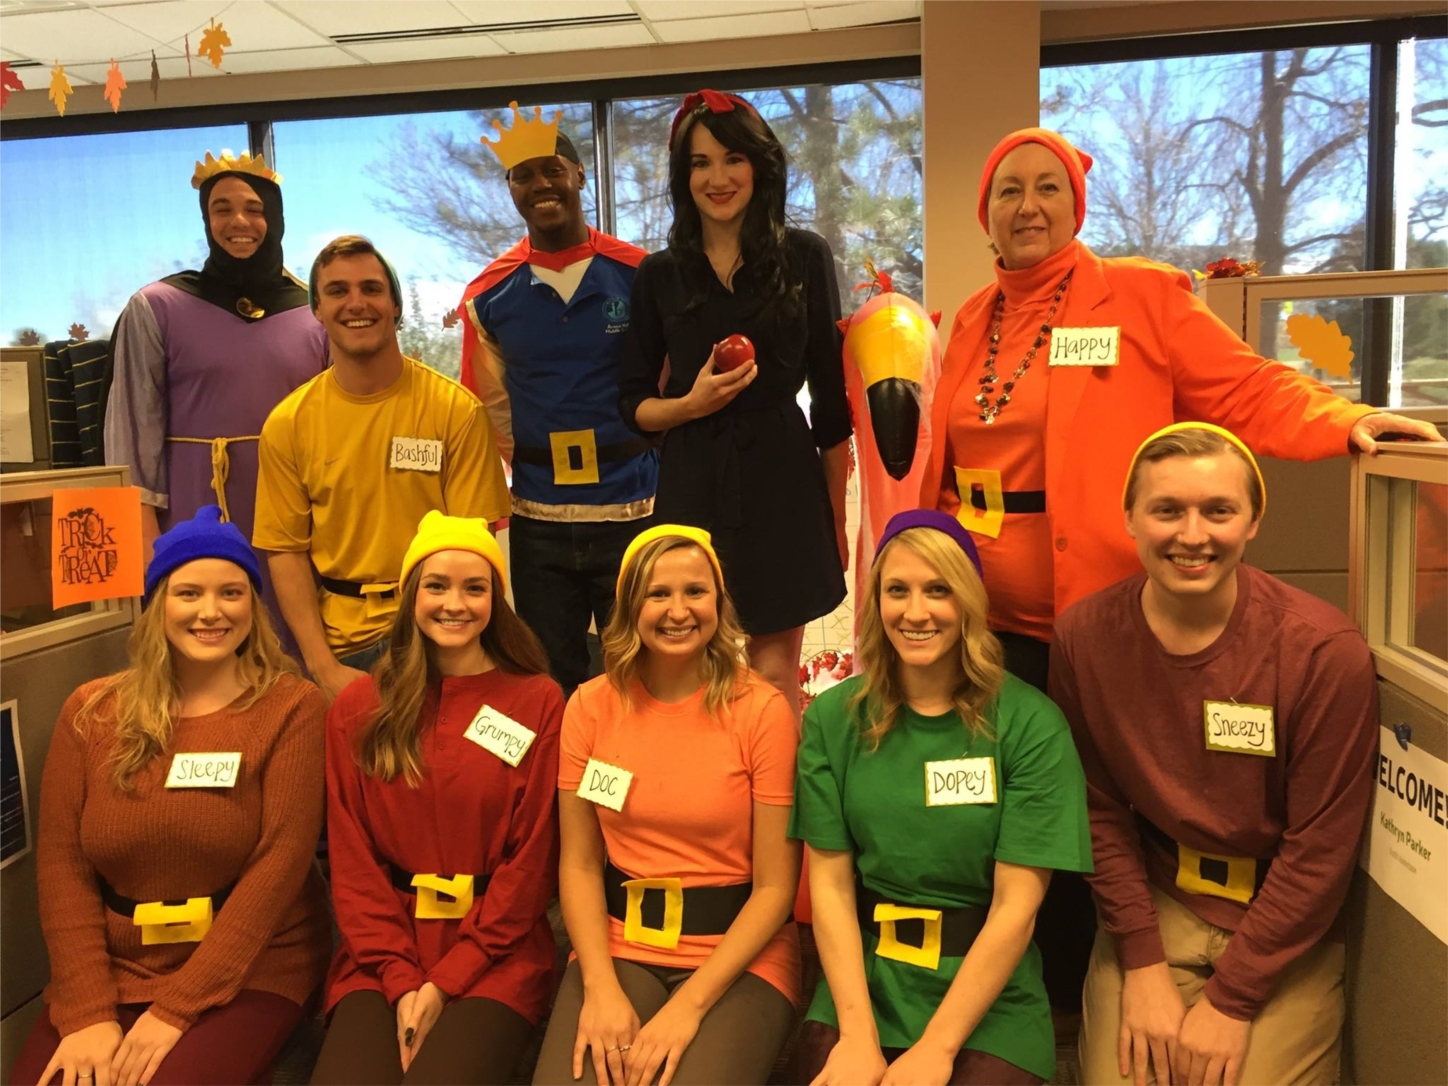 Snow White and her Seven Dwarfs gear up for the annual Halloween potluck.